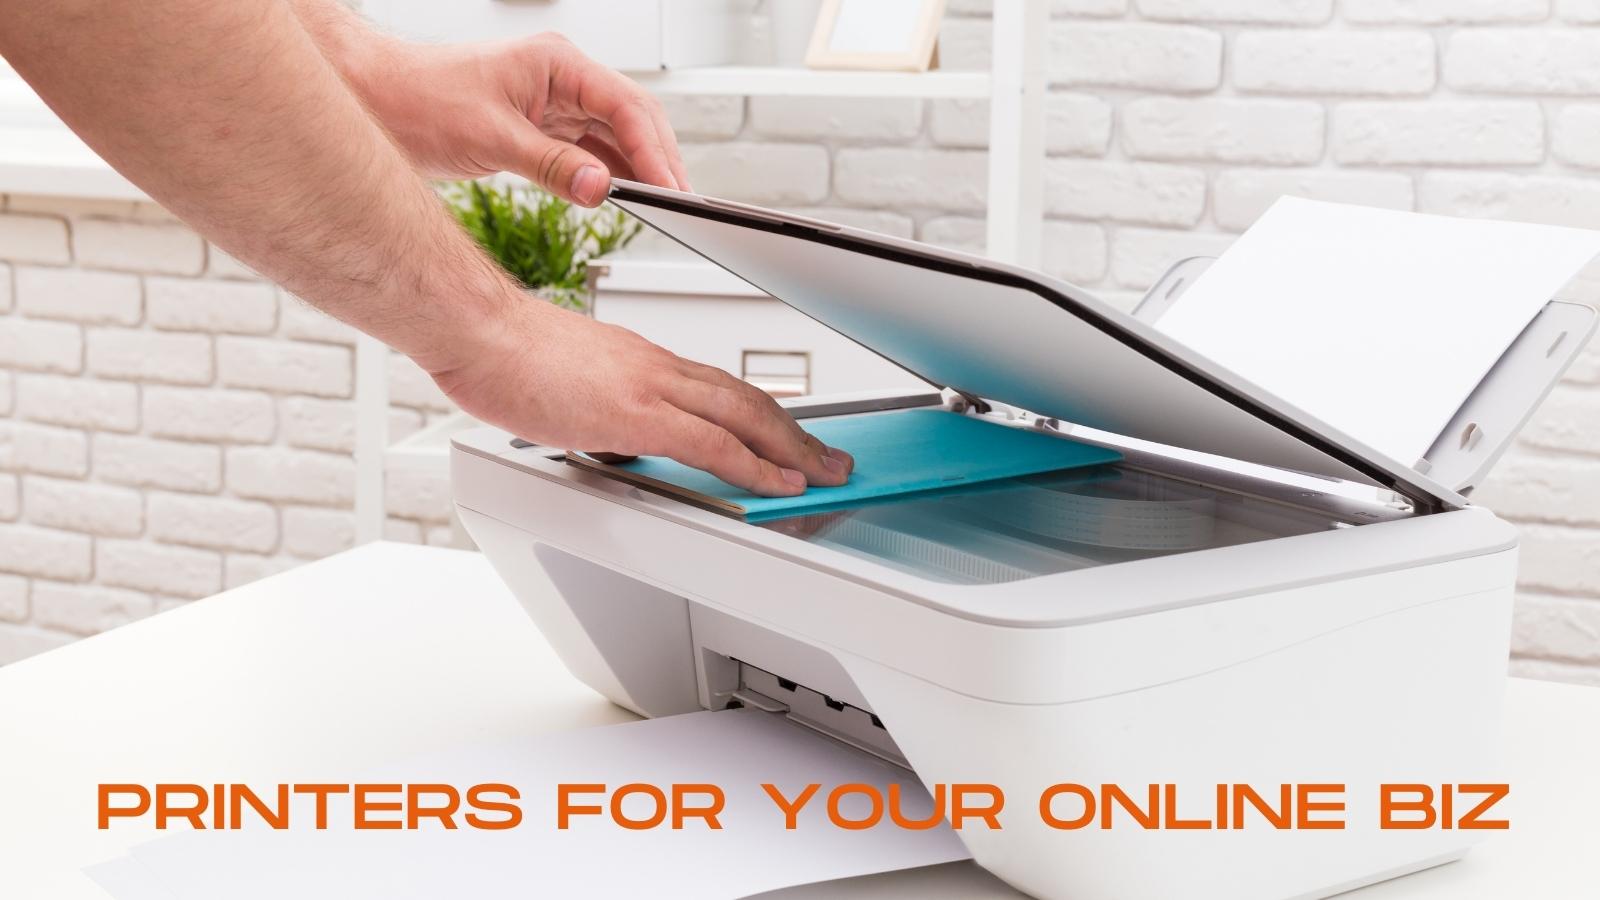 3 Things To Consider Before Buying A Printer